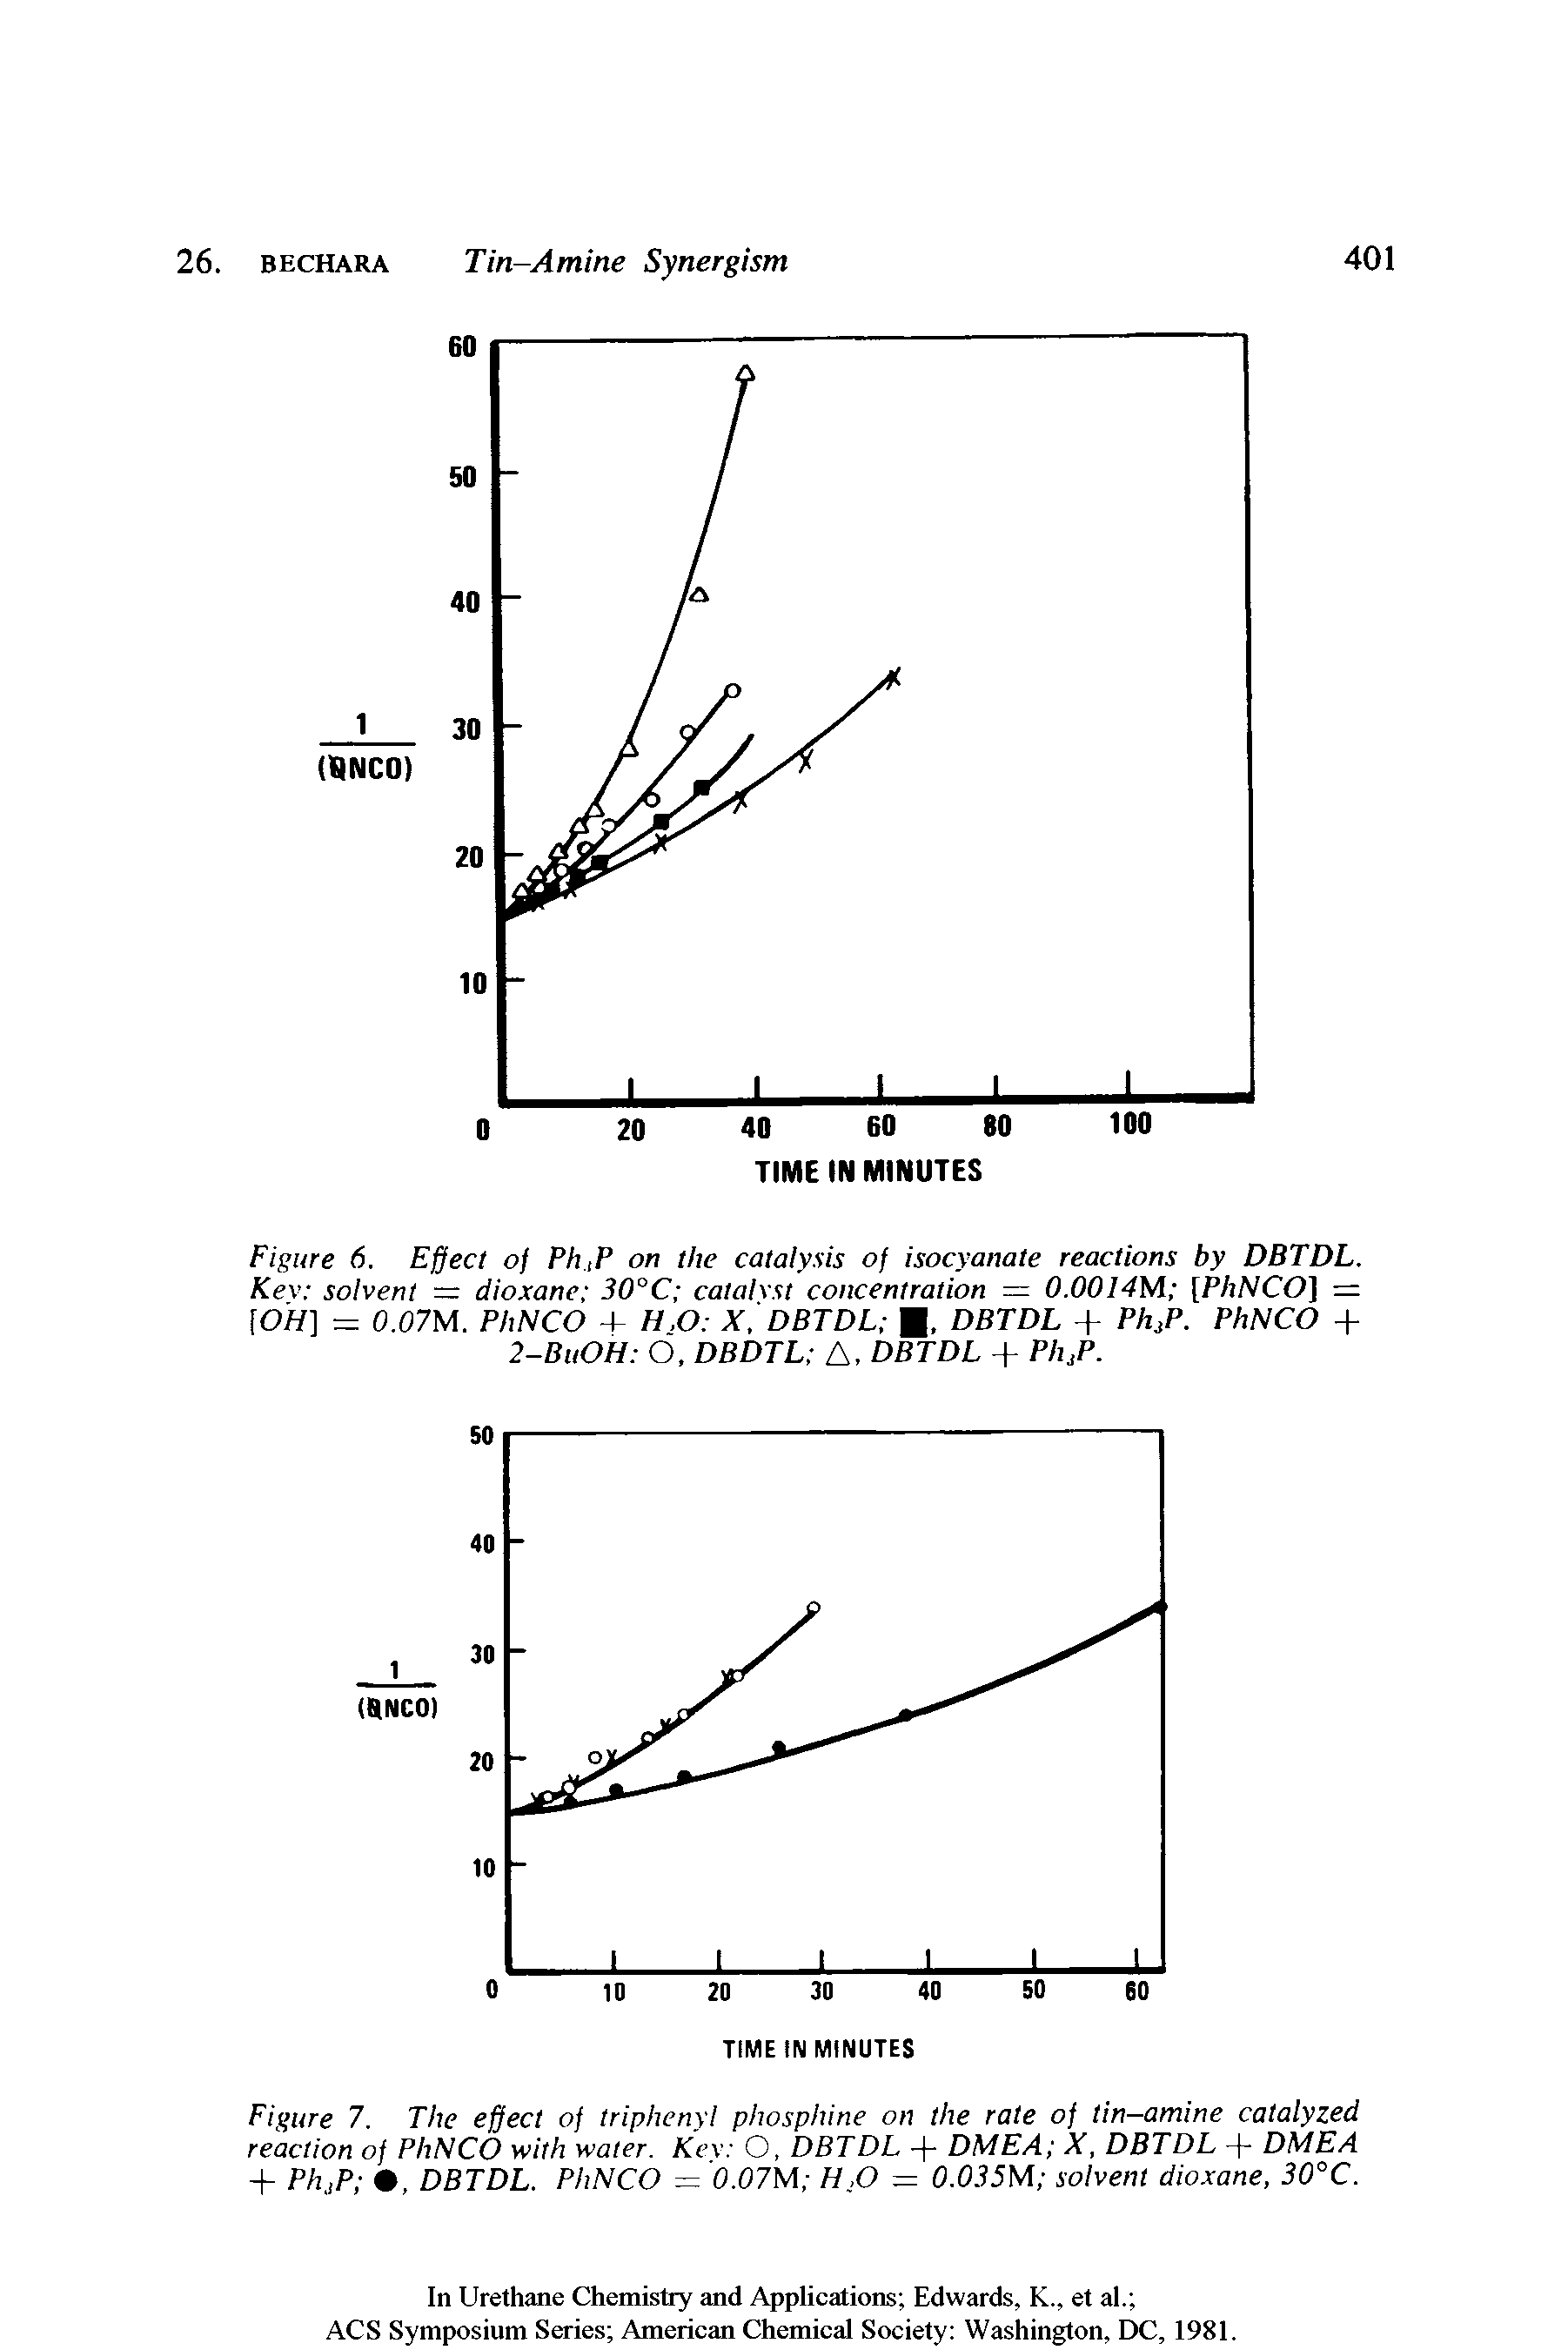 Figure 7. The effect of triphenyl phosphine on the rate of tin-amine catalyzed reaction of PhNCO with water. Kev O, DBTDL -f- DMEA X, DBTDL - DMEA + Ph.,P , DBTDL. PhNCO = 0.07NI H.O — 0.035M solvent dioxane, 30°C.